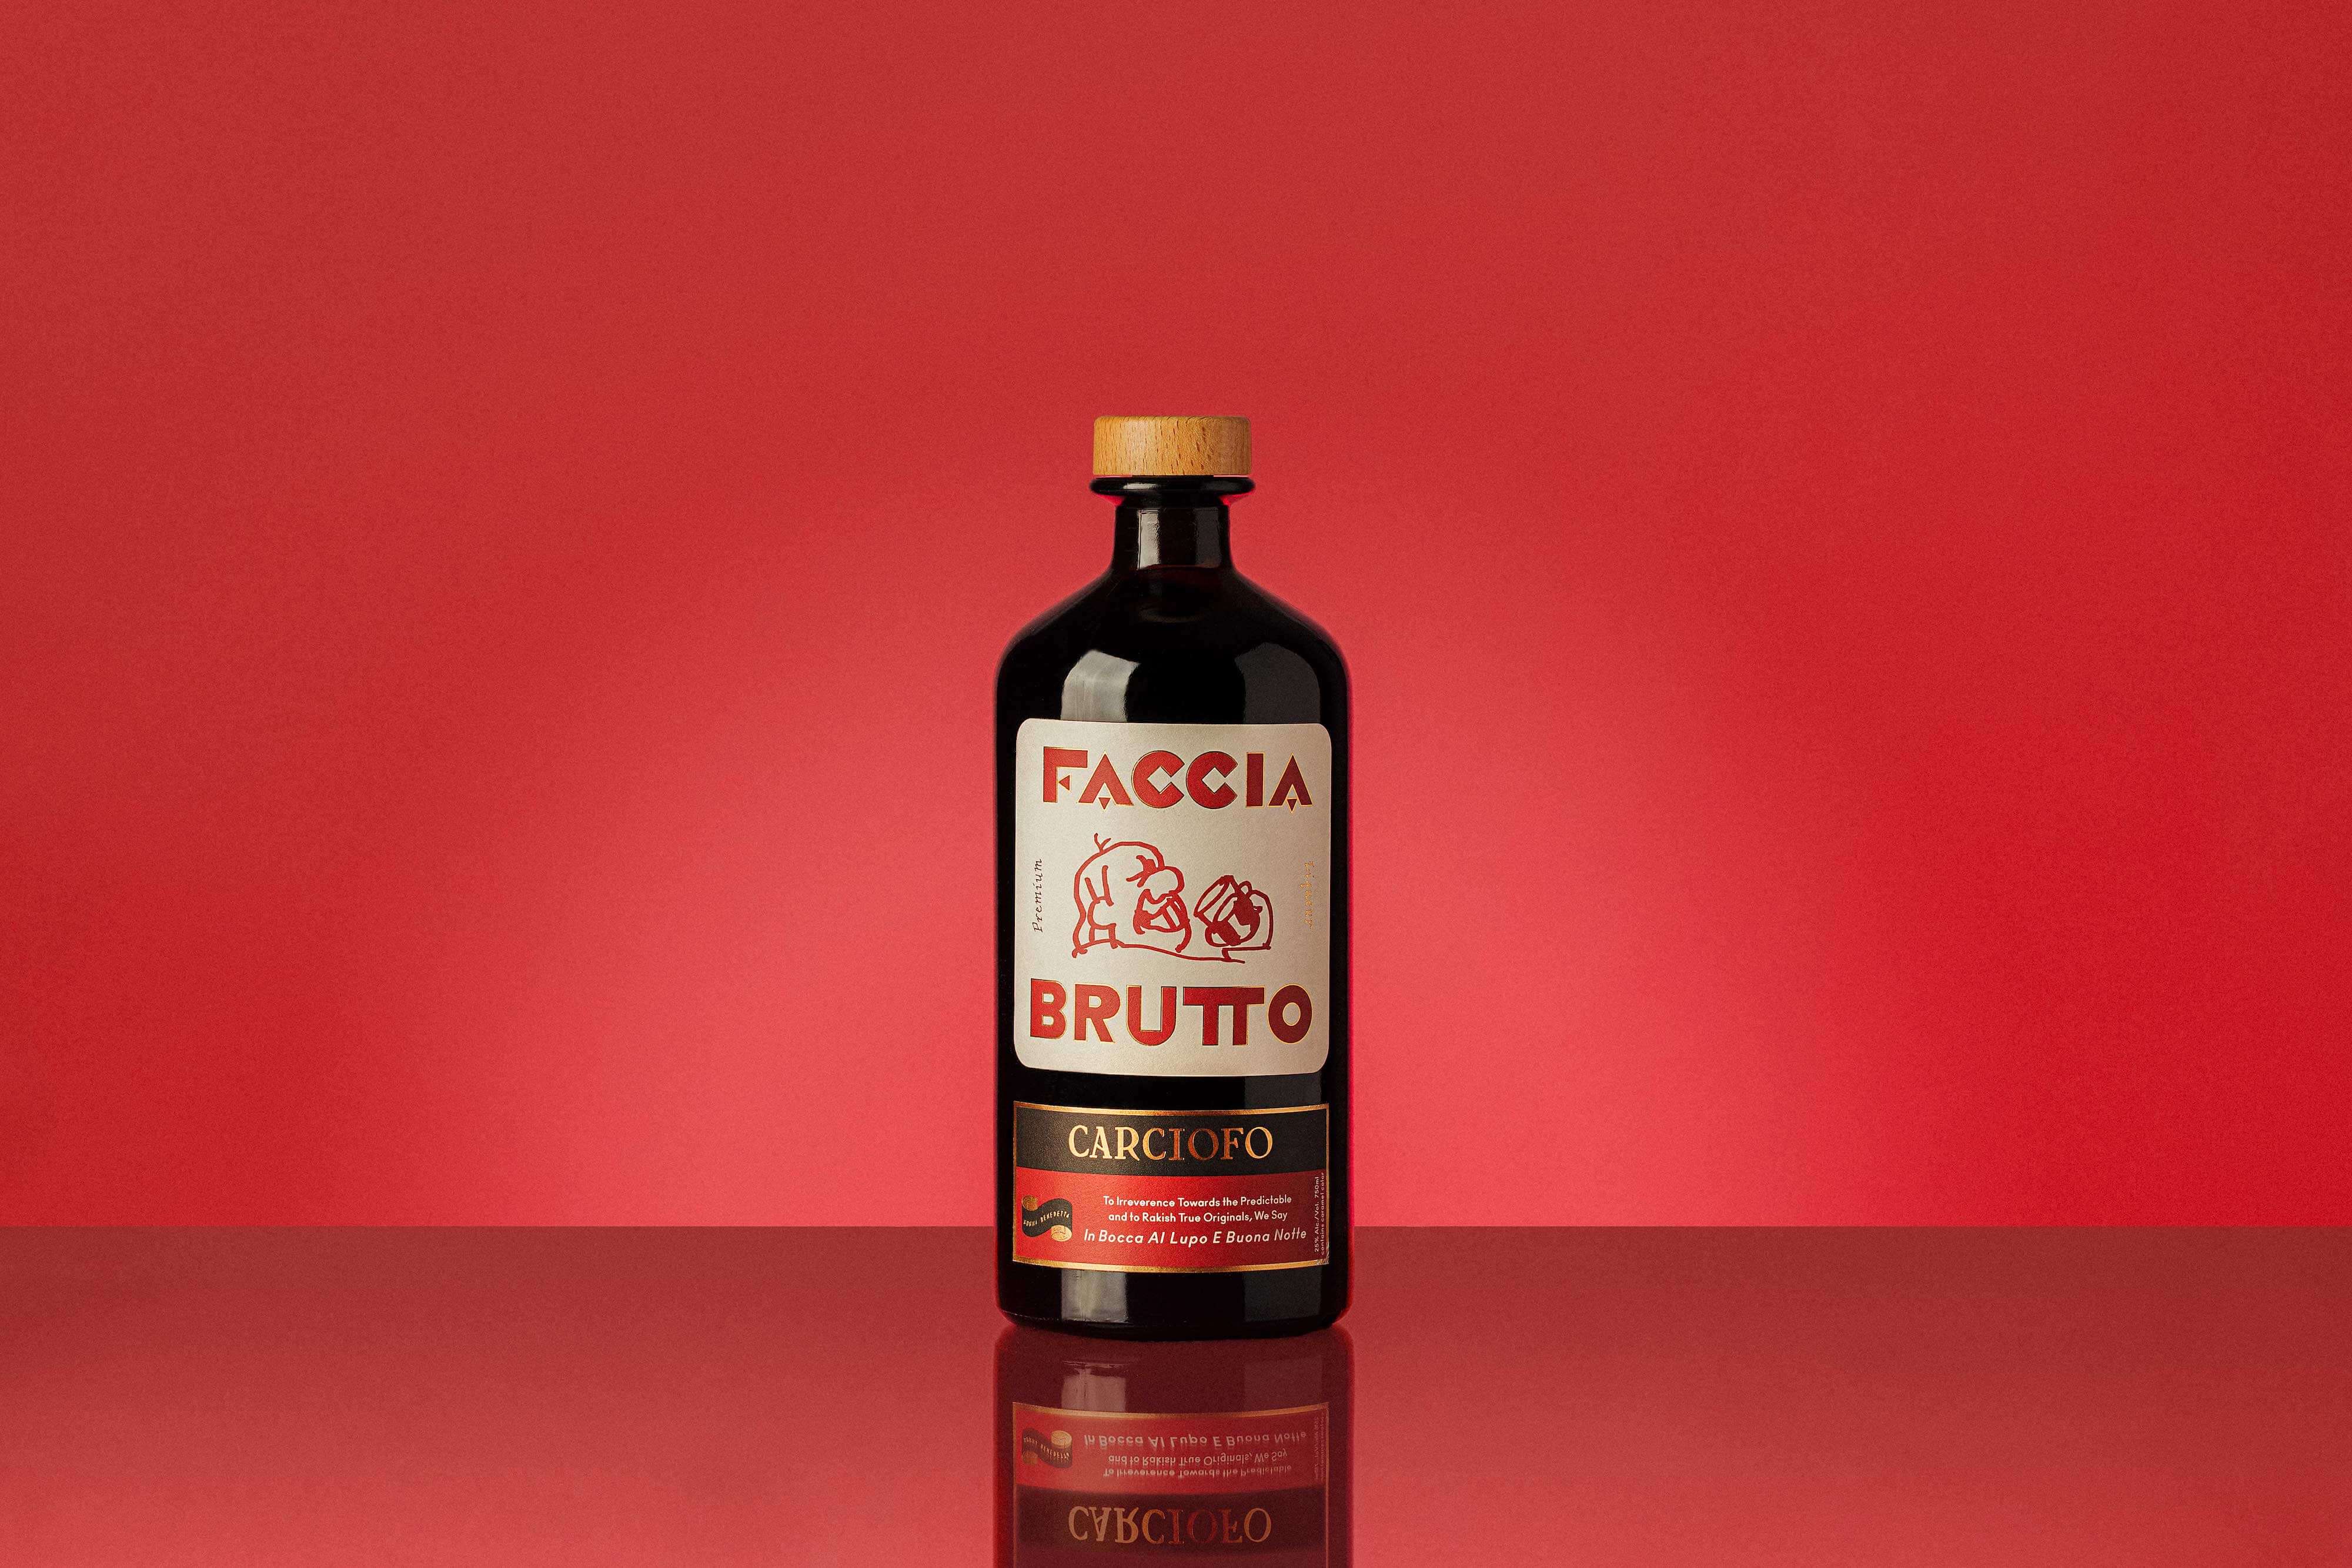 Wide shot of front of Faccia Brutto Carciofo bottle with red background